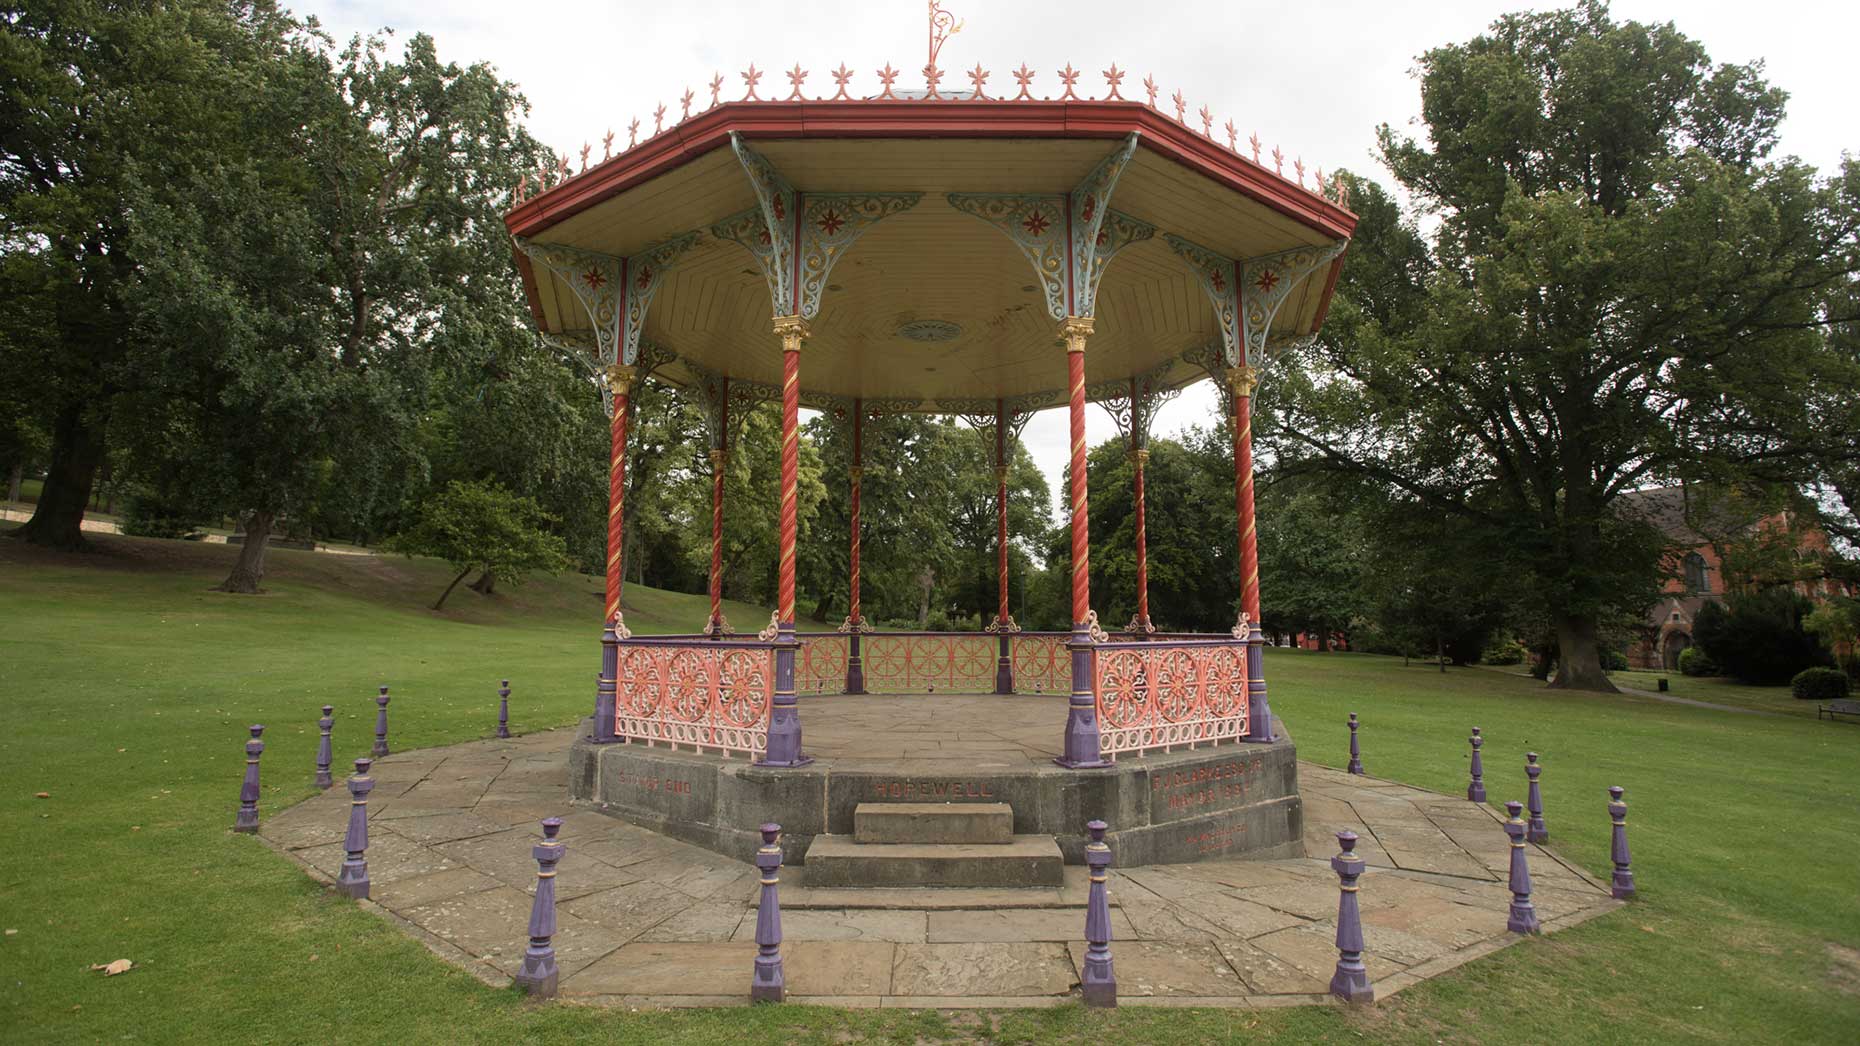 The Bandstand at Lincoln Arboretum. Photo: Steve Smailes for The Lincolnite